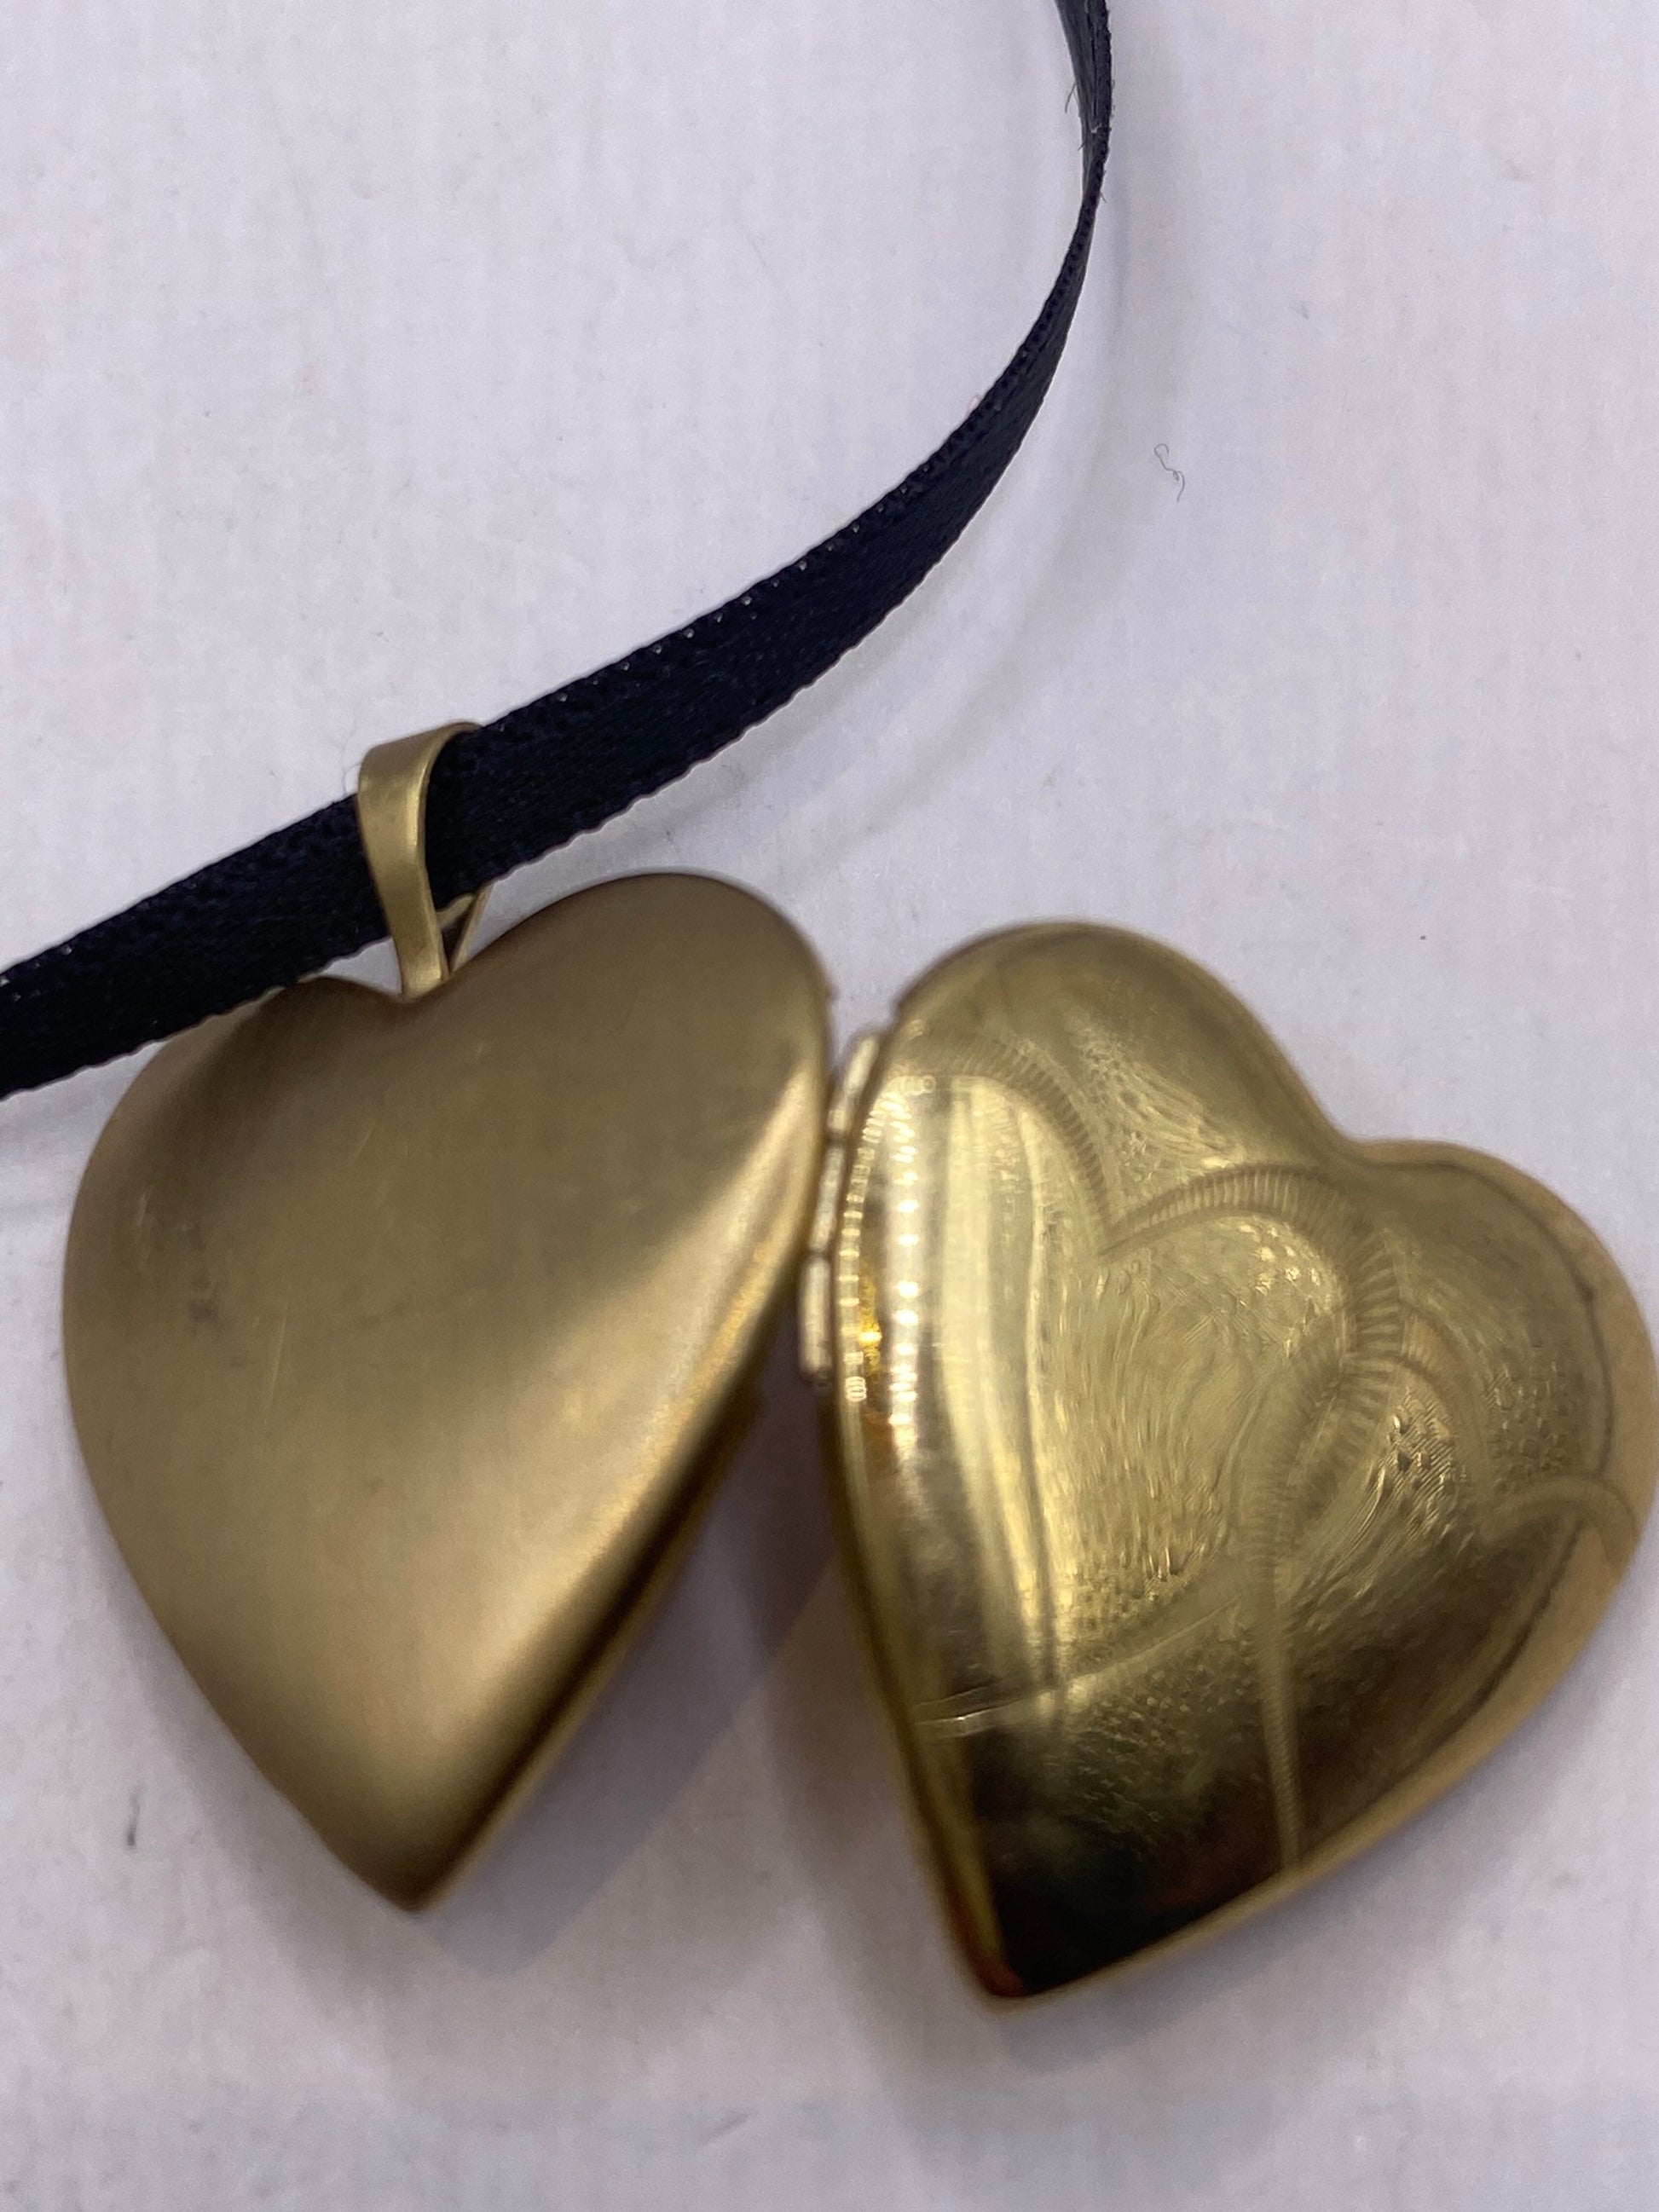 Vintage Gold Locket | Tiny Heart 9k Gold Filled Pendant Photo Memory Charm Engraved Two Hearts | Choker Necklace